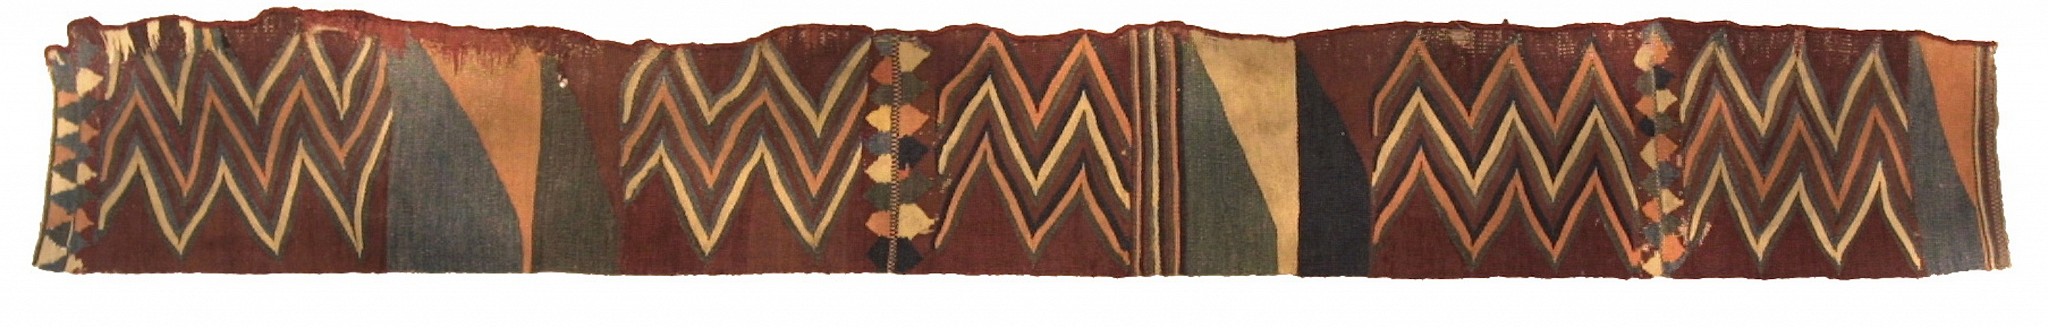 Peru, Nazca kilim-style border to tunic with alternating zig zags
The zig-zags on this border are separated by bold triangular fields with ivory, blue and orange on brown ground.  This weaving is one of the vertical side borders to the tunic.
Media: Textile
Dimensions: Length 83" x  Width 14 1/2"
$11,500
91091